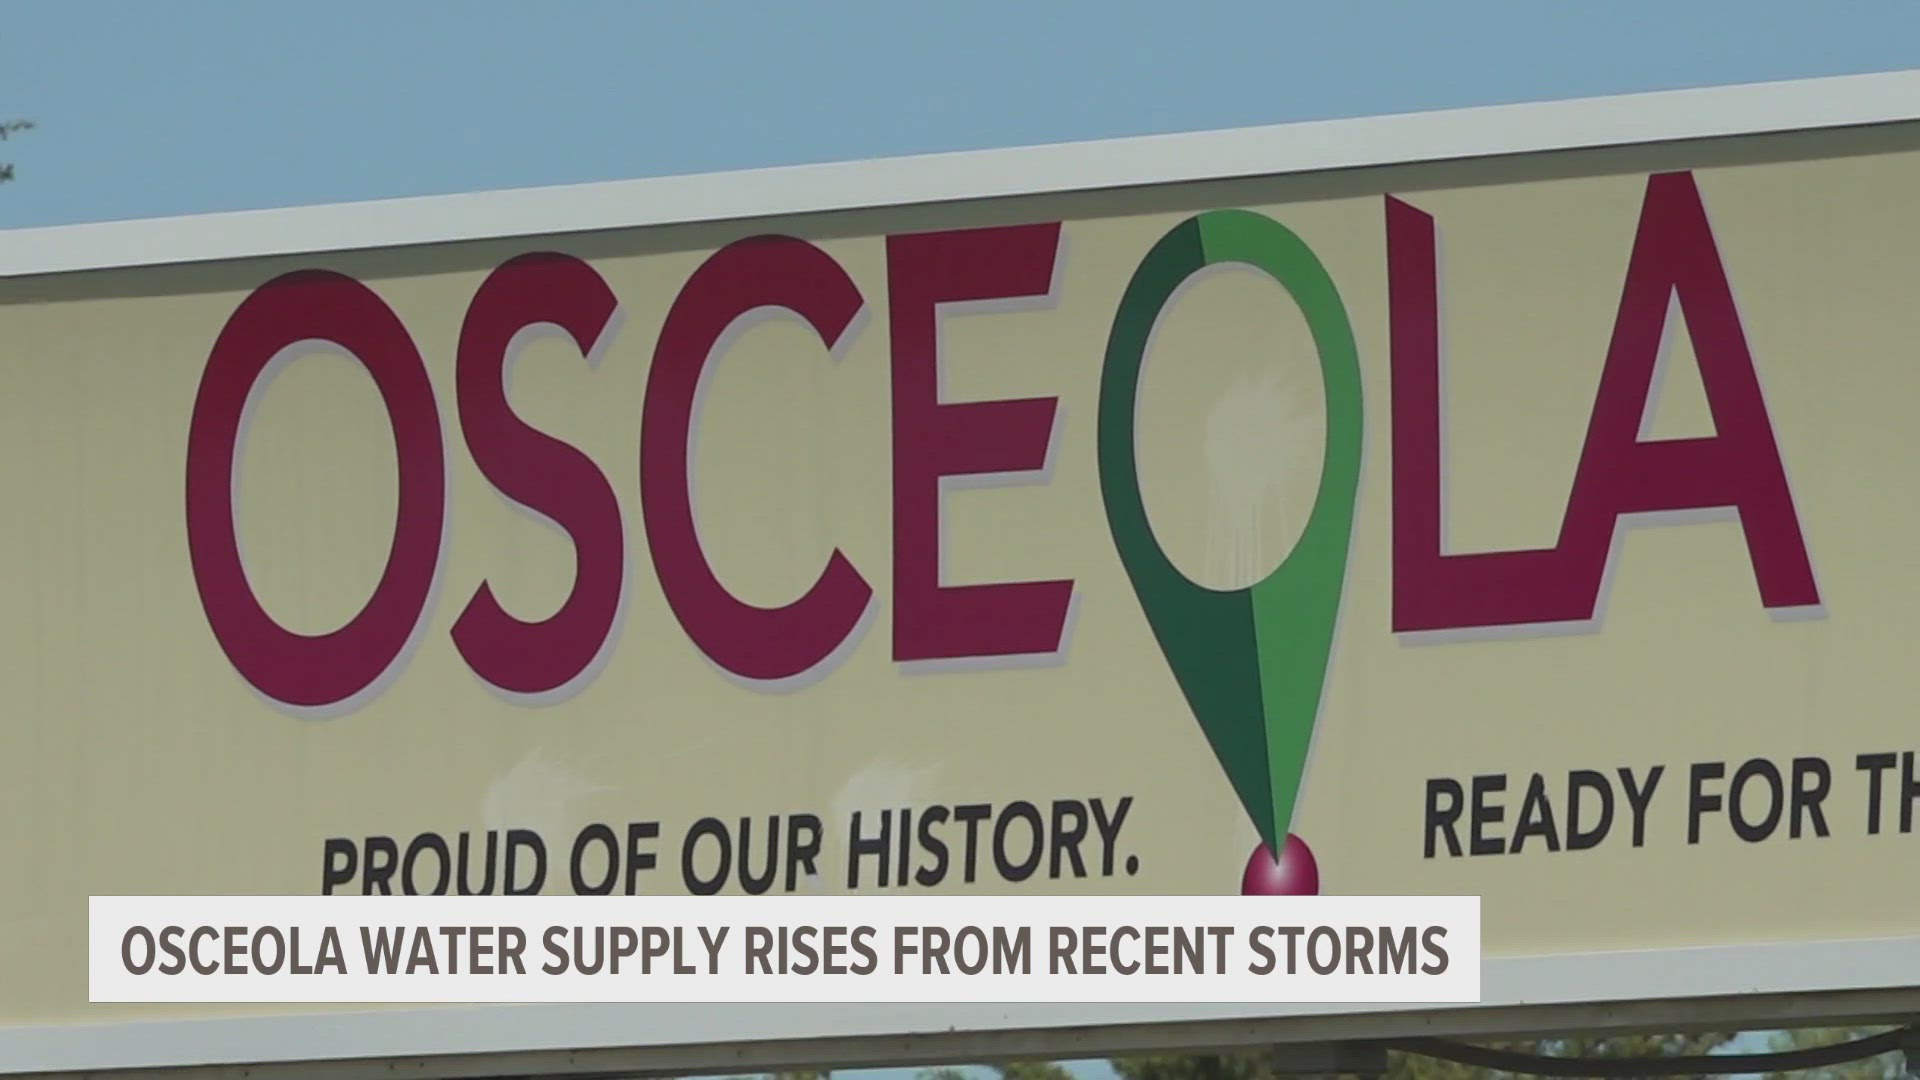 A four-year drought brought the city of Osceola, Iowa, close to losing its water supply, but recent rain is helping fill West Lake again.